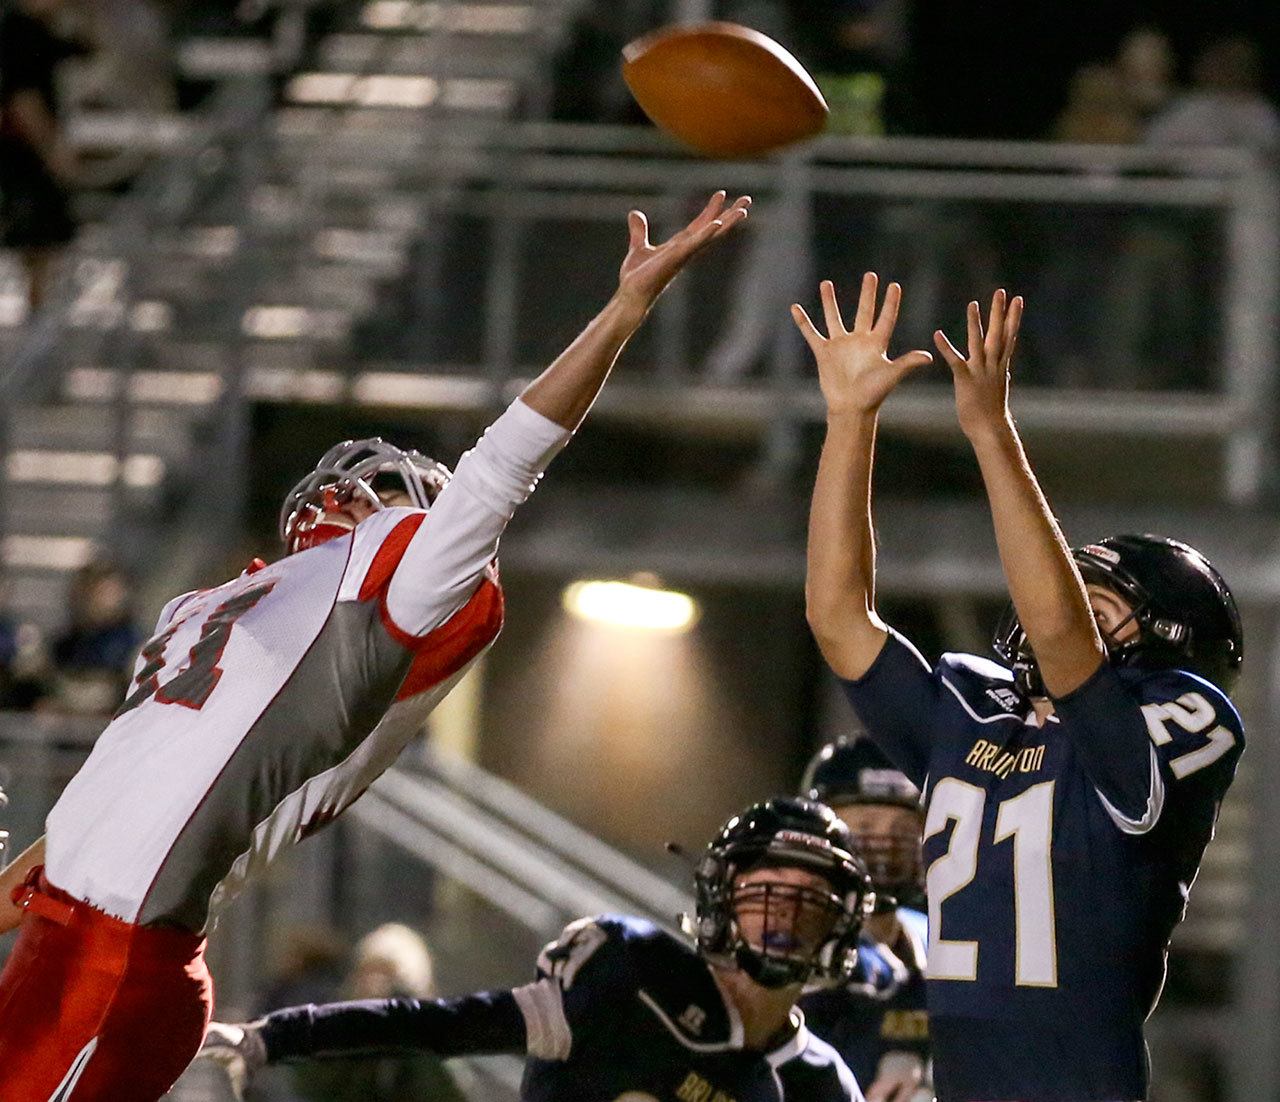 Arlington’s Cameron McCormack catches a two-point conversion over the outstretched hand of Stanwood’s Payton Greene during the annual Stilly Cup football game Friday night in Arlington. (Kevin Clark / The Herald)